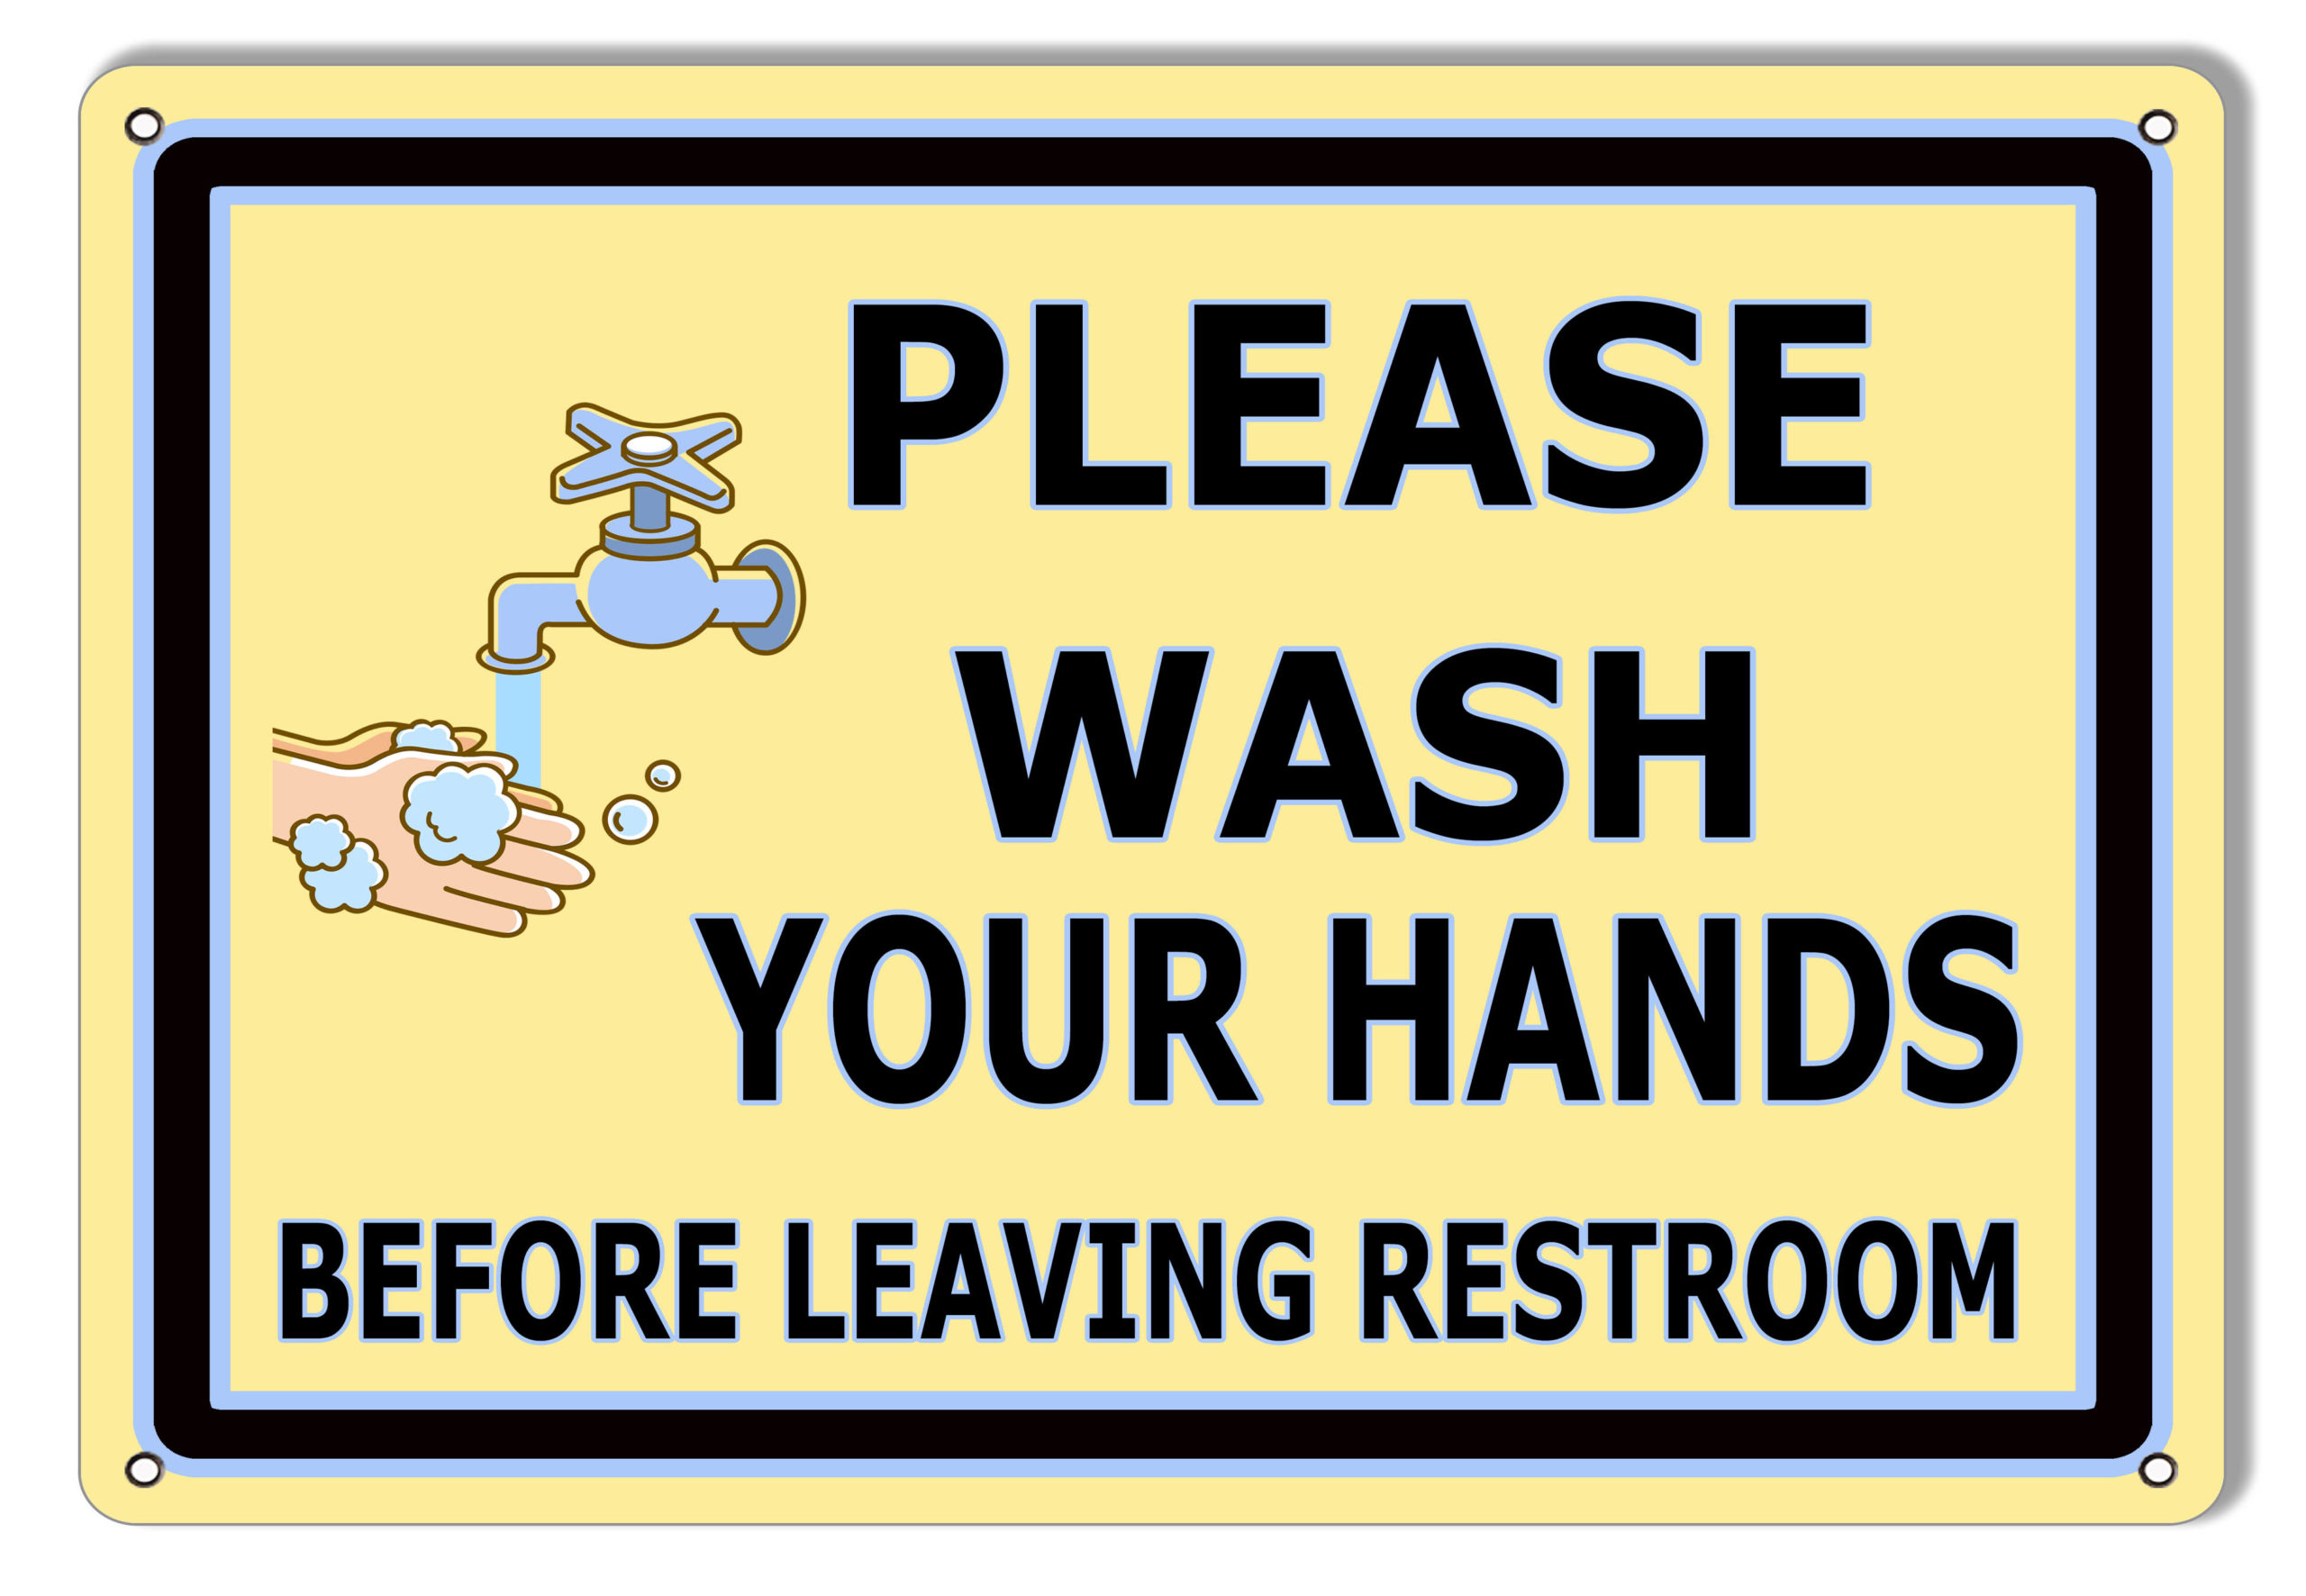 Please Wash Your Hands Restroom Metal Sign 9x12 Reproduction Vintage